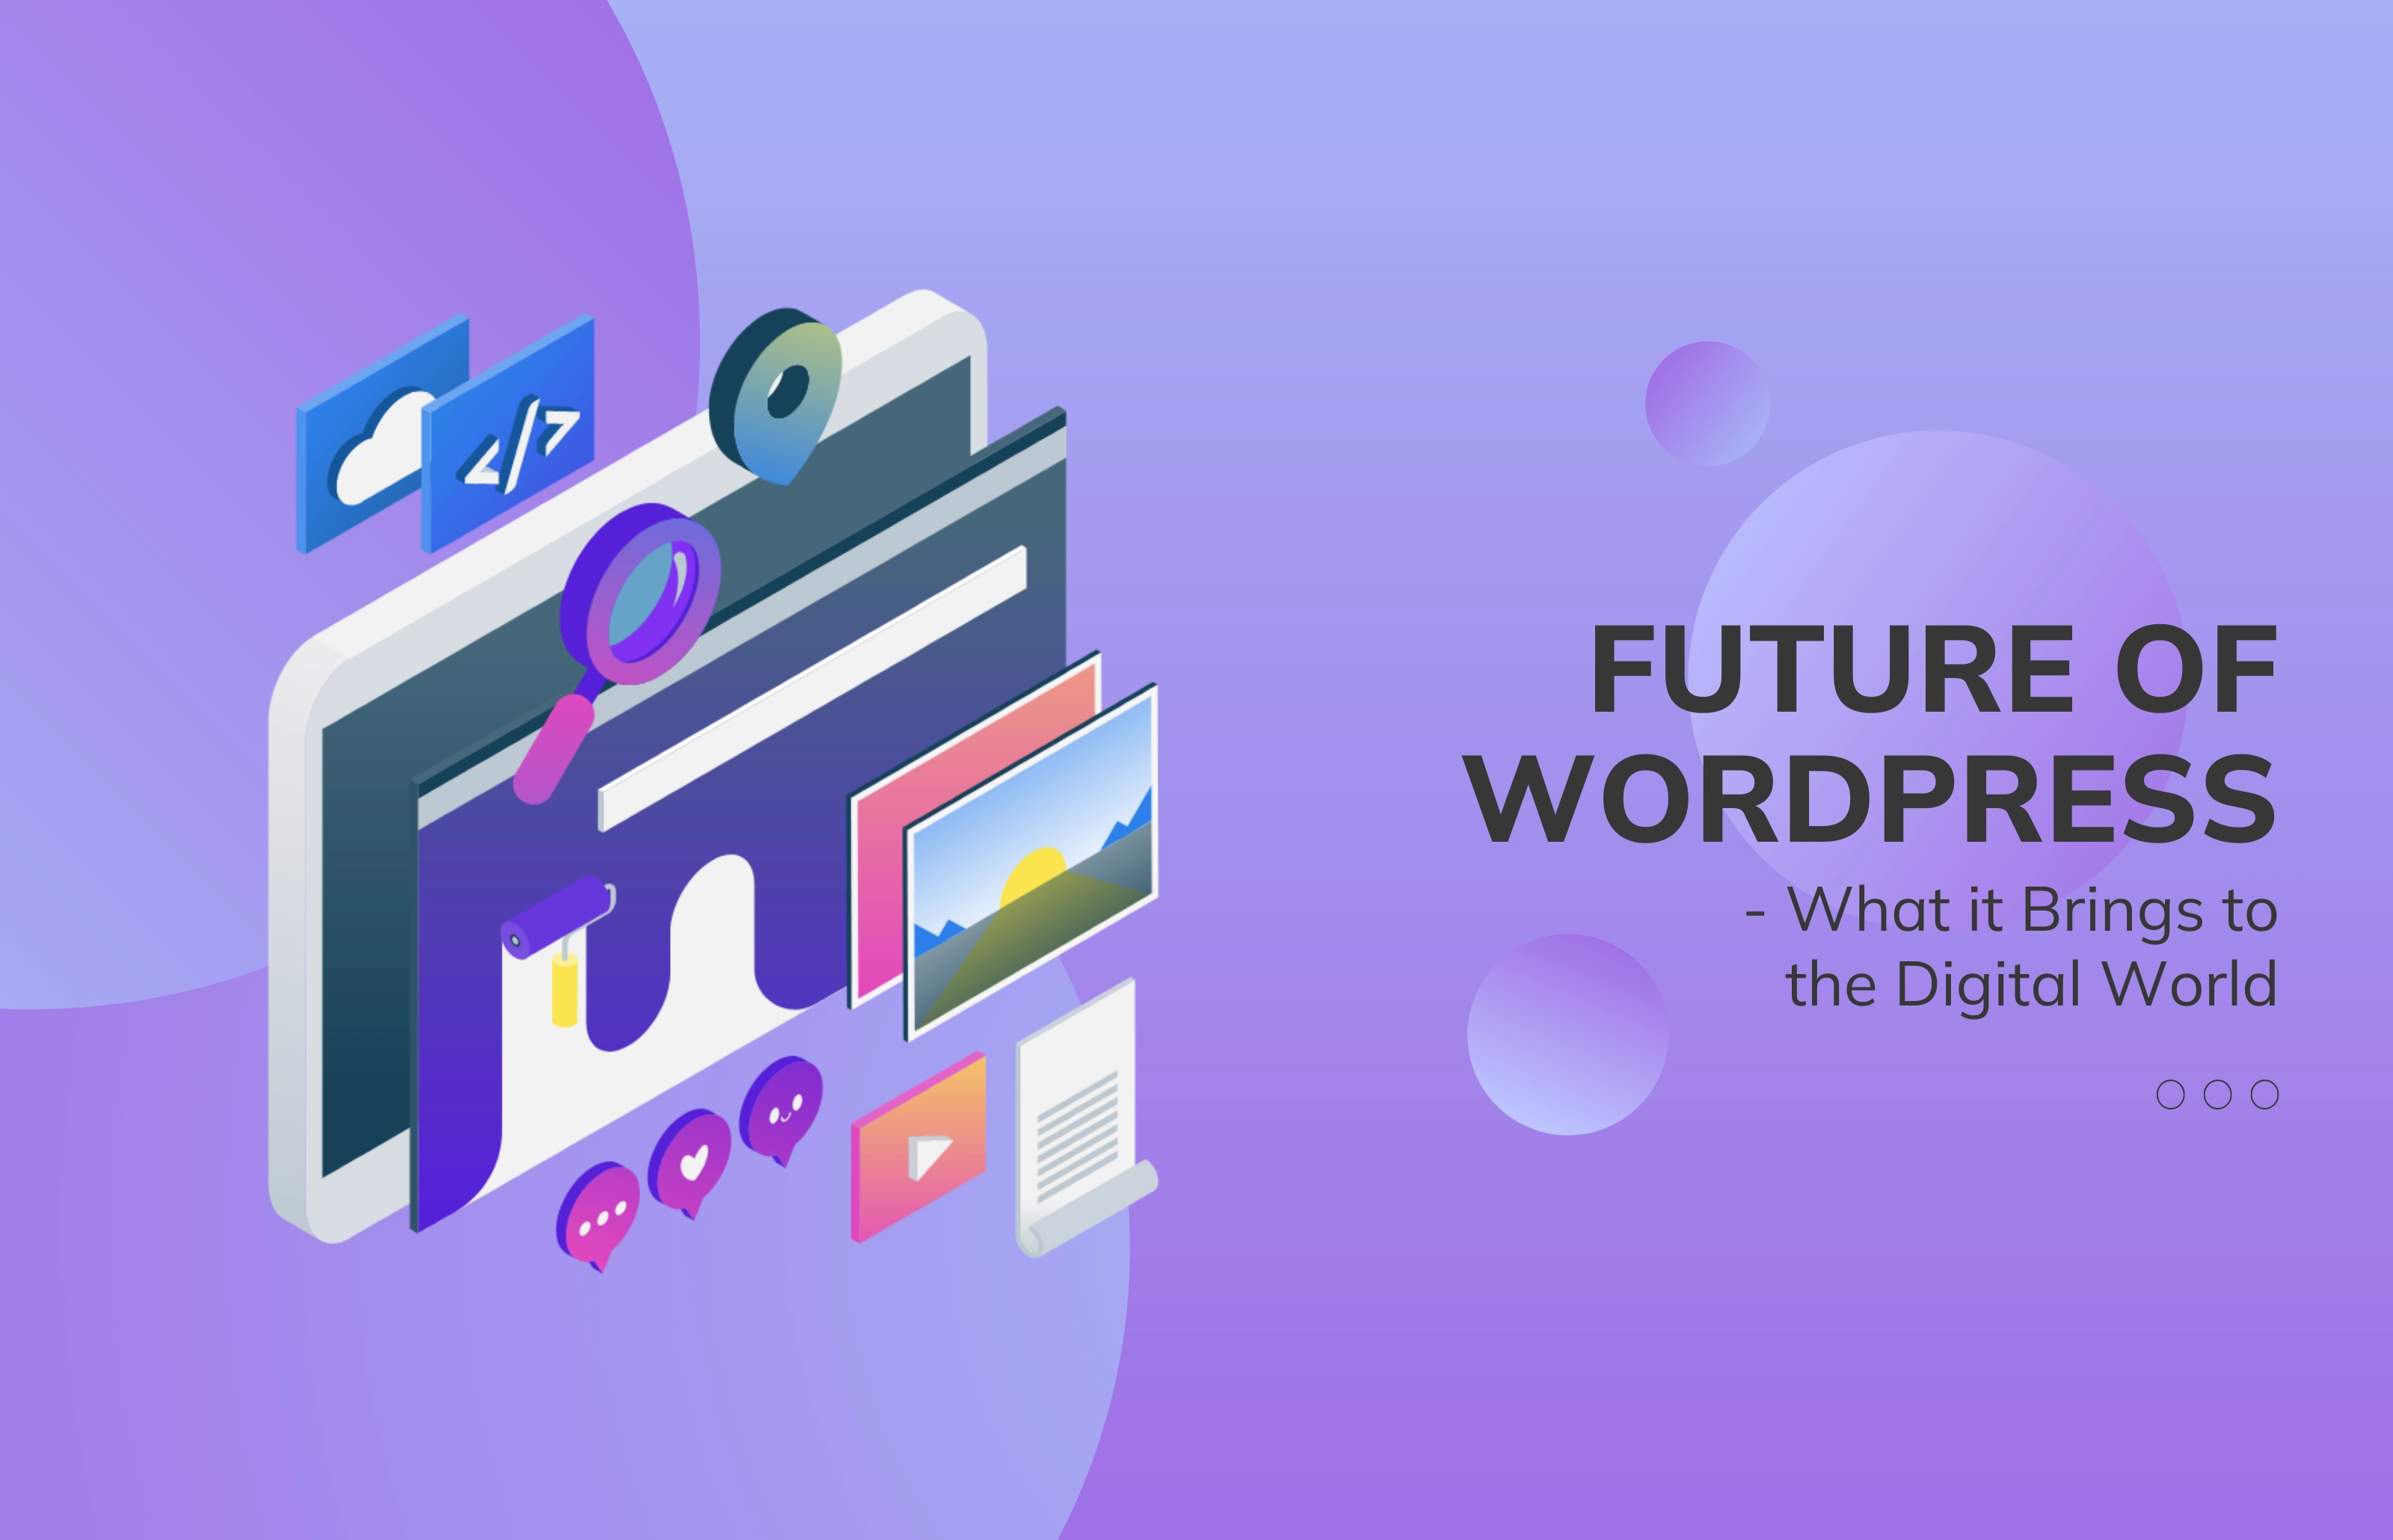 Future of WordPress - What it Brings to the Digital World